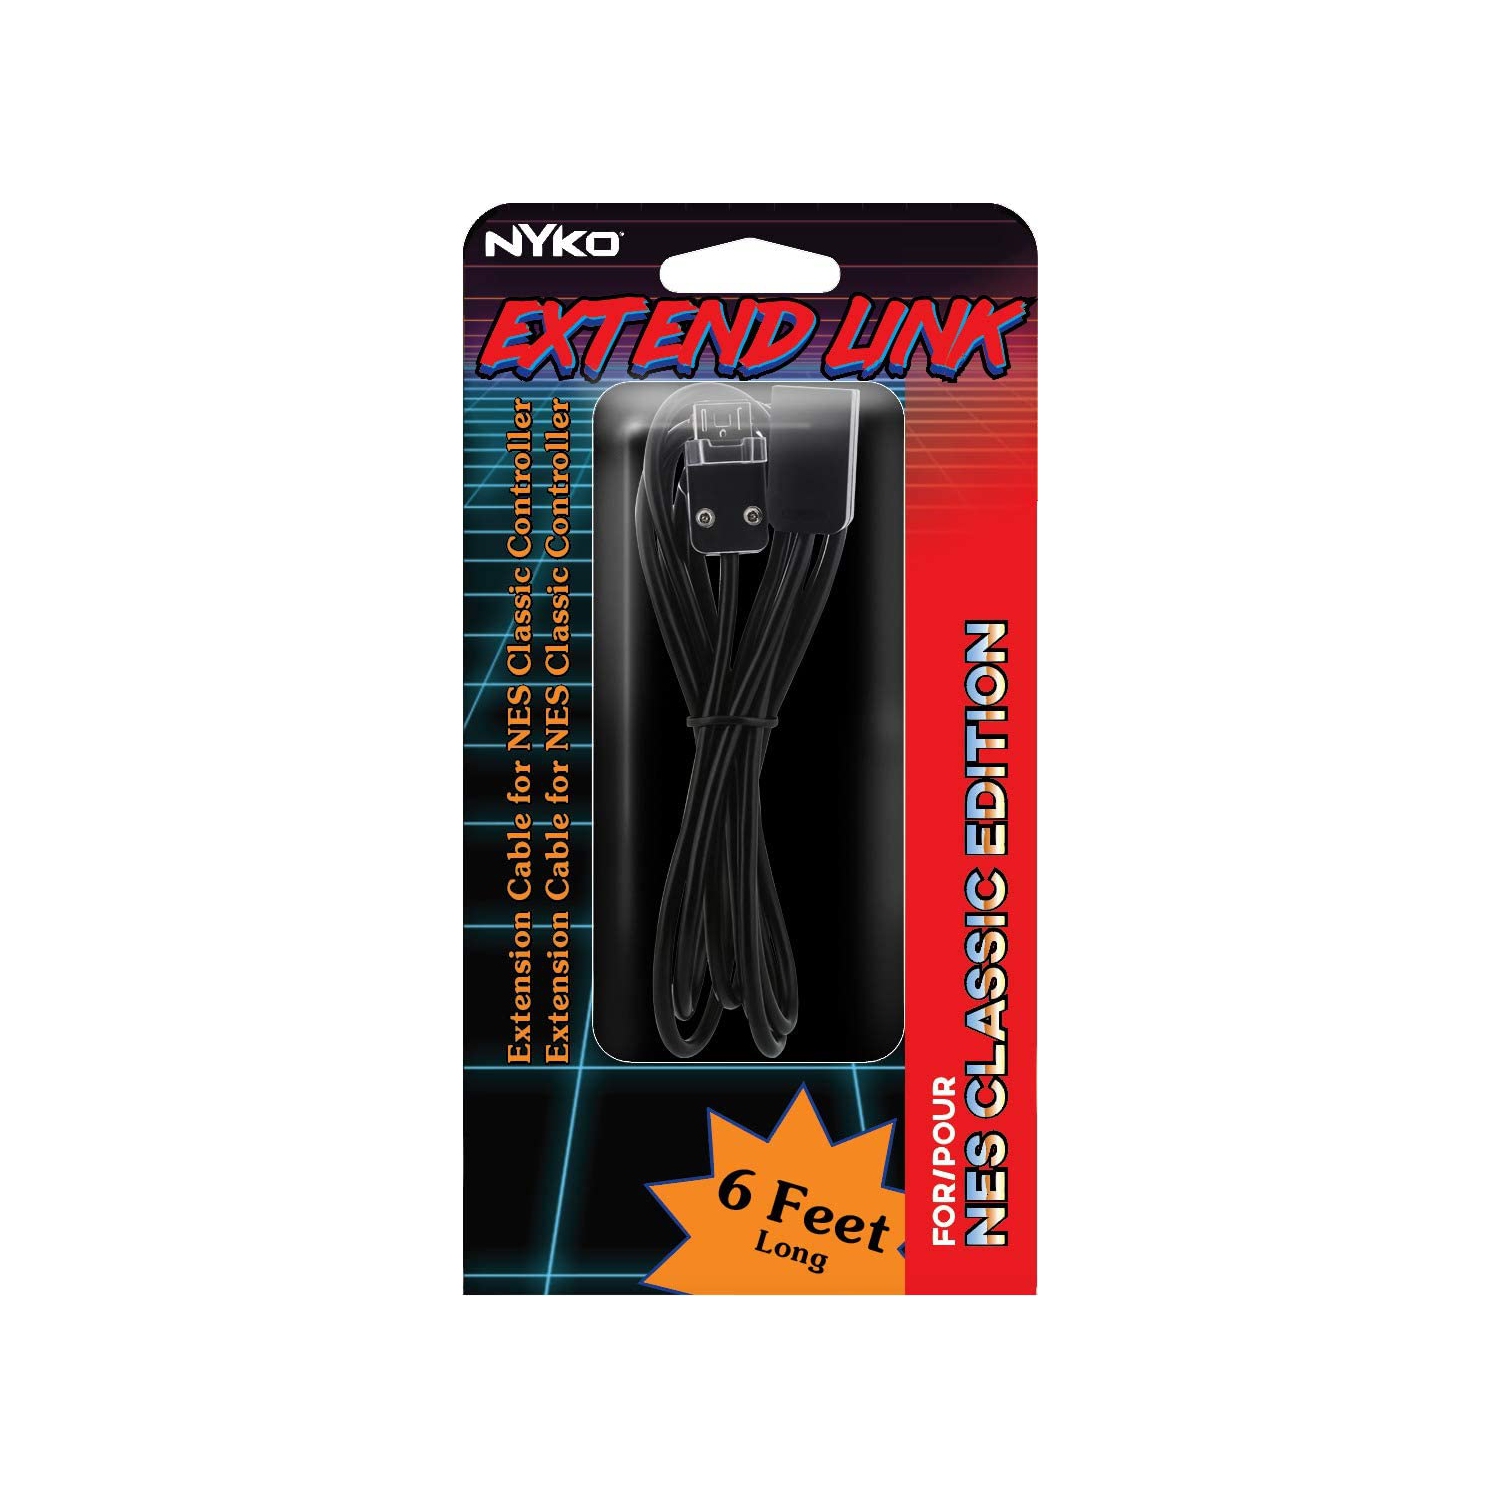 Nyko Extend Link - 6ft Extension Cable for Nintendo NES Classic Edition